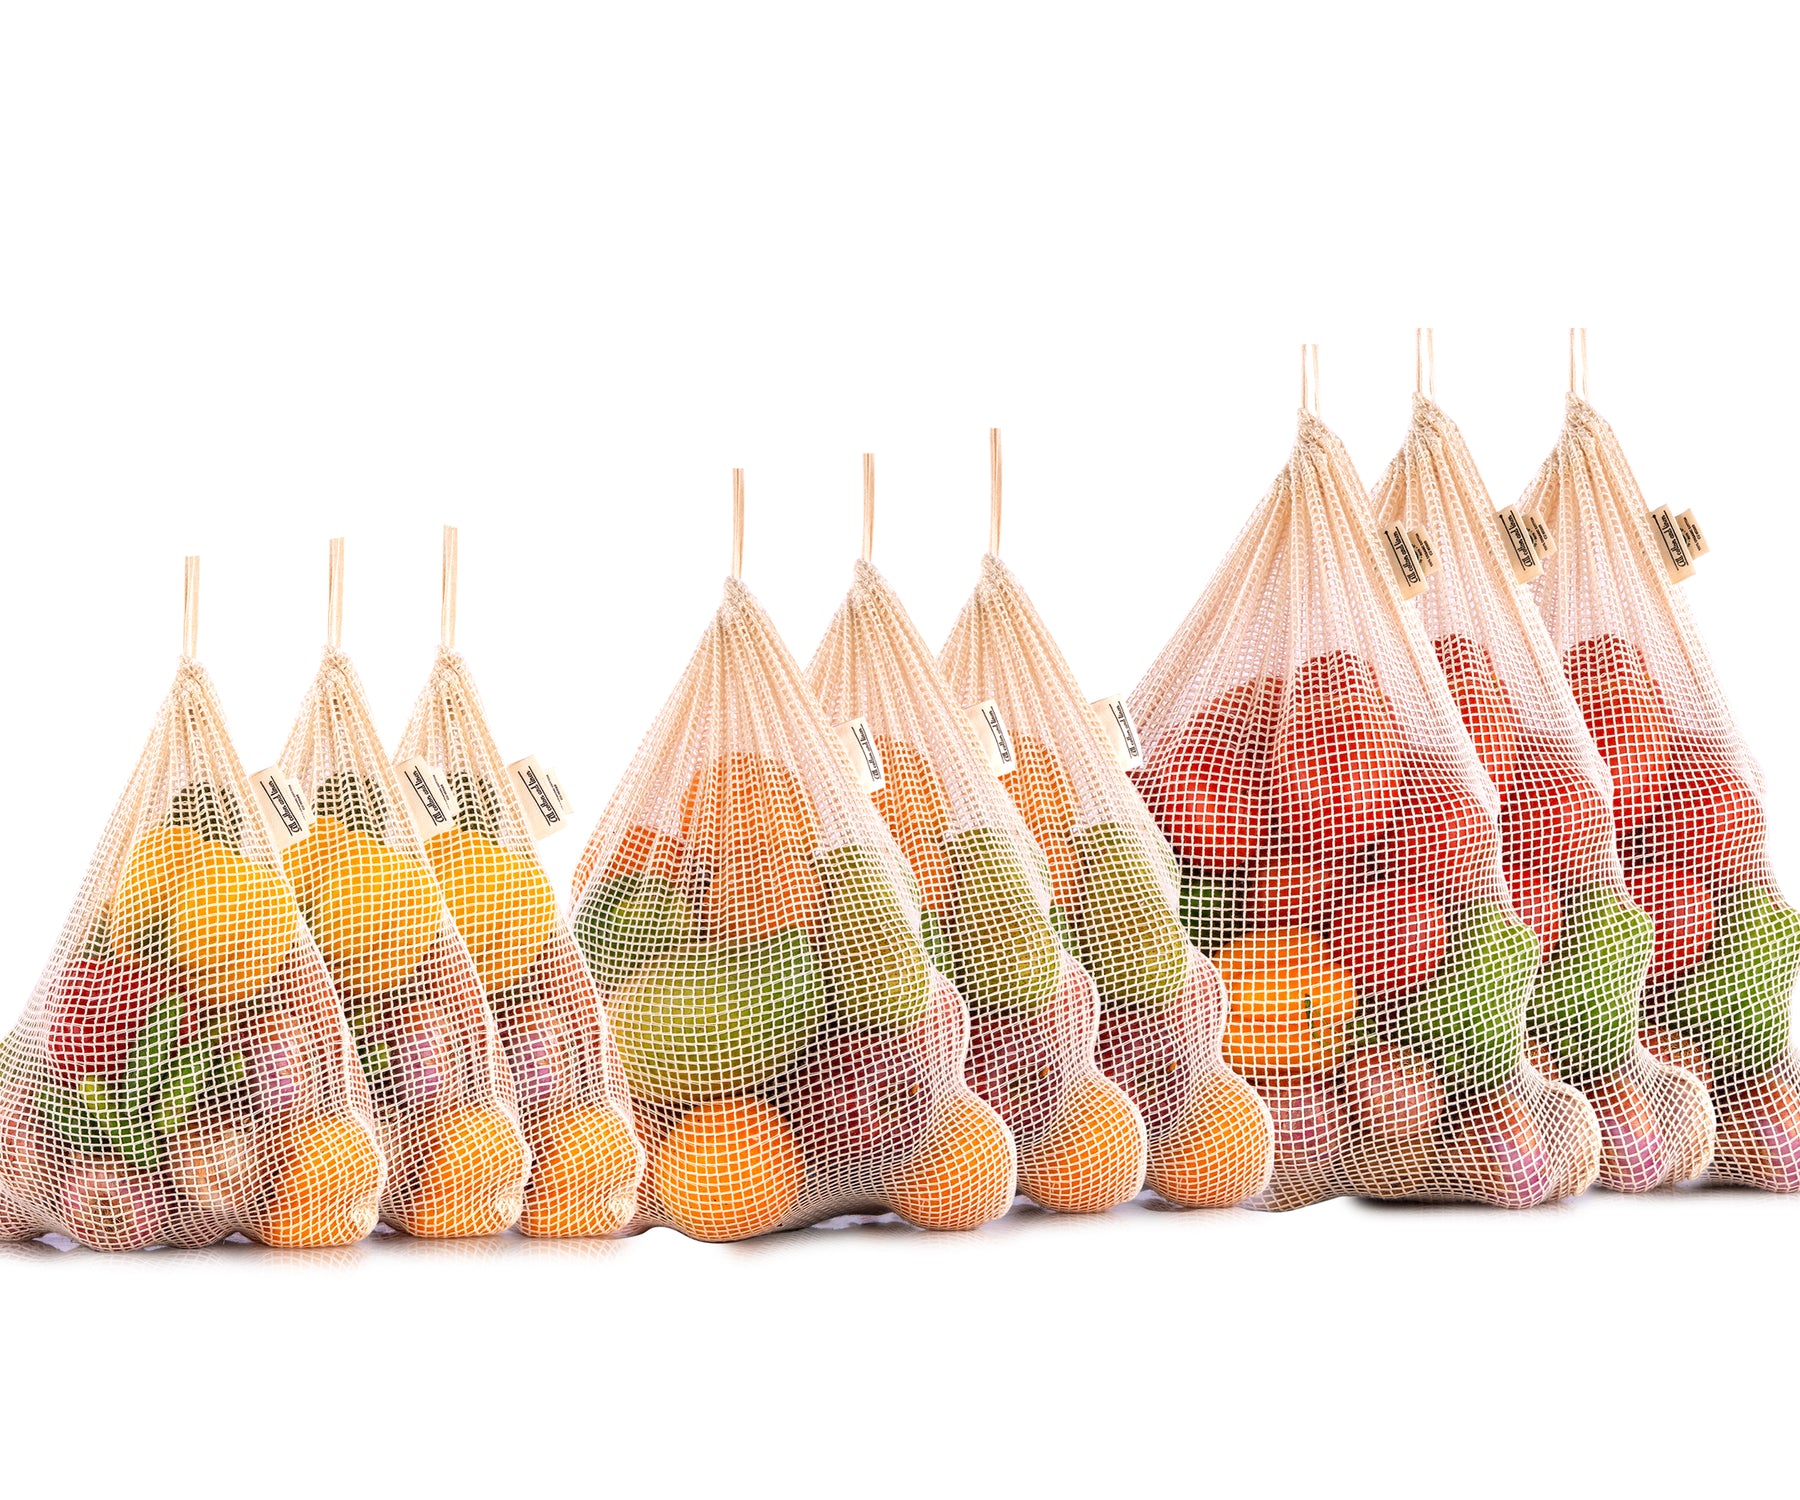 Multiple reusable mesh bags showcasing a variety of fruits